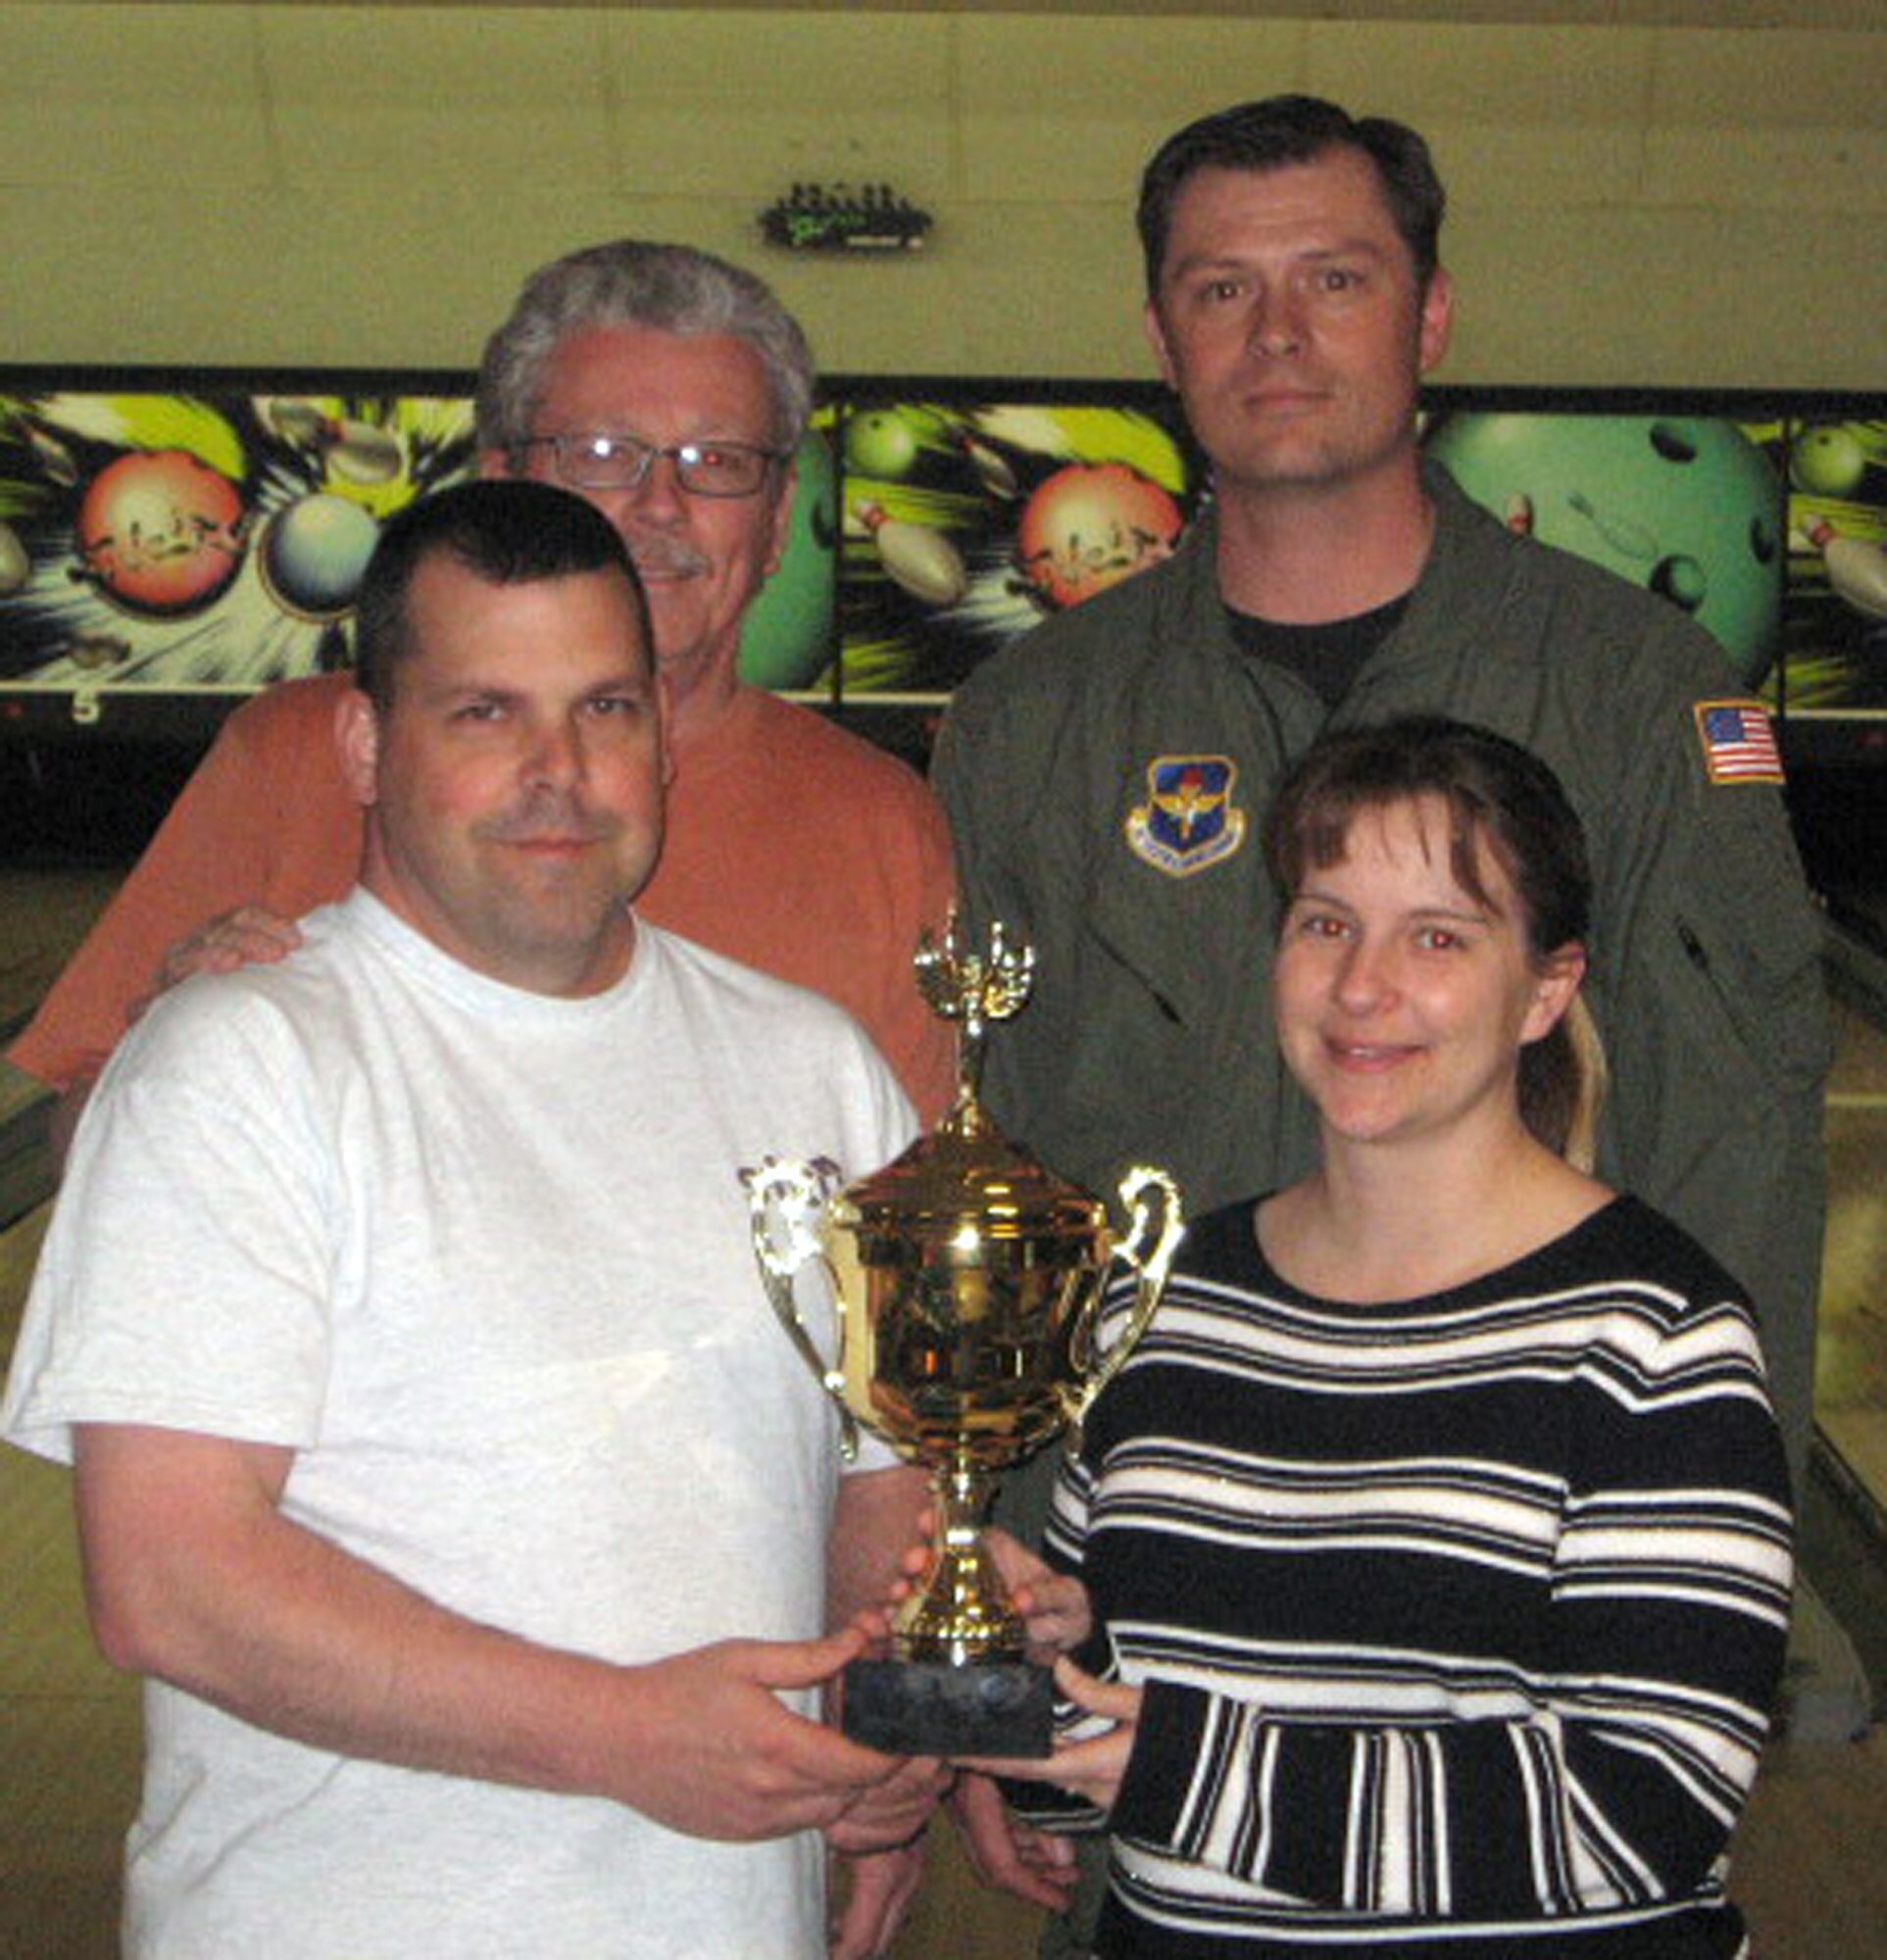 FAIRCHILD AIR FORCE BASE, Wash. – Clockwise from left front: Tech. Sgt. Jeff Hammond, David Wooten, Jim Bratsveen and Tara Funderburg pose with their first place trophy. The 336th Training Group team also included Master Sgt. Cory Edmiston, Staff Sgt. Michael Brown, Senior Airman Brian Whitmoyer, Senior Airman Claude Brown and Alicha Harris. (U.S. Air Force photo/Jason McCathren)